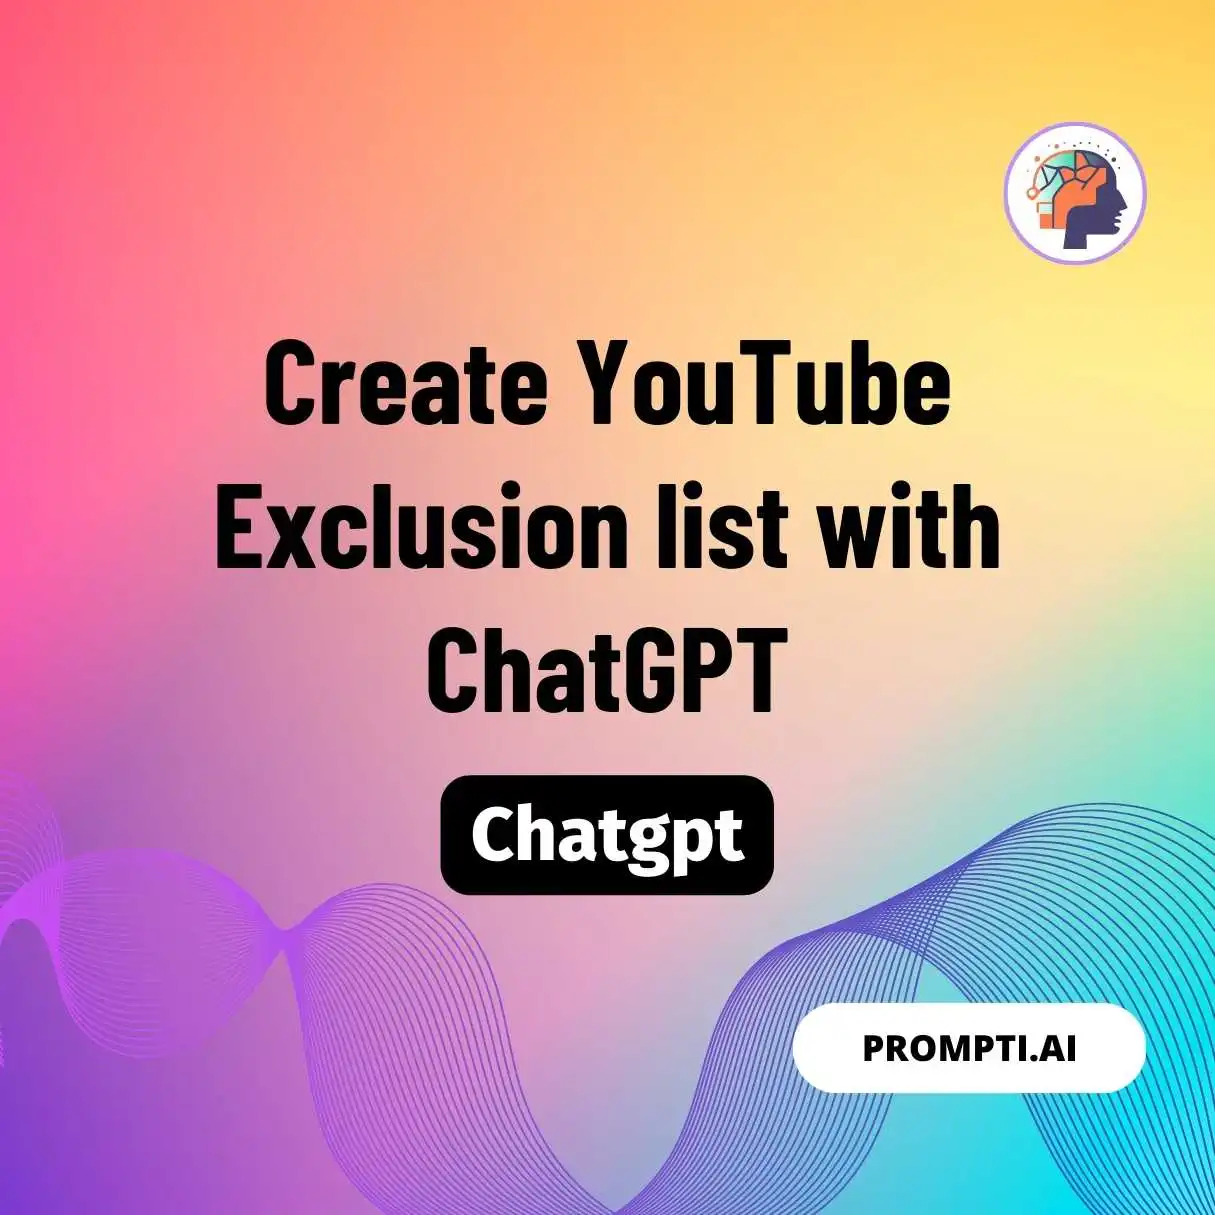 Create YouTube Exclusion list with ChatGPT